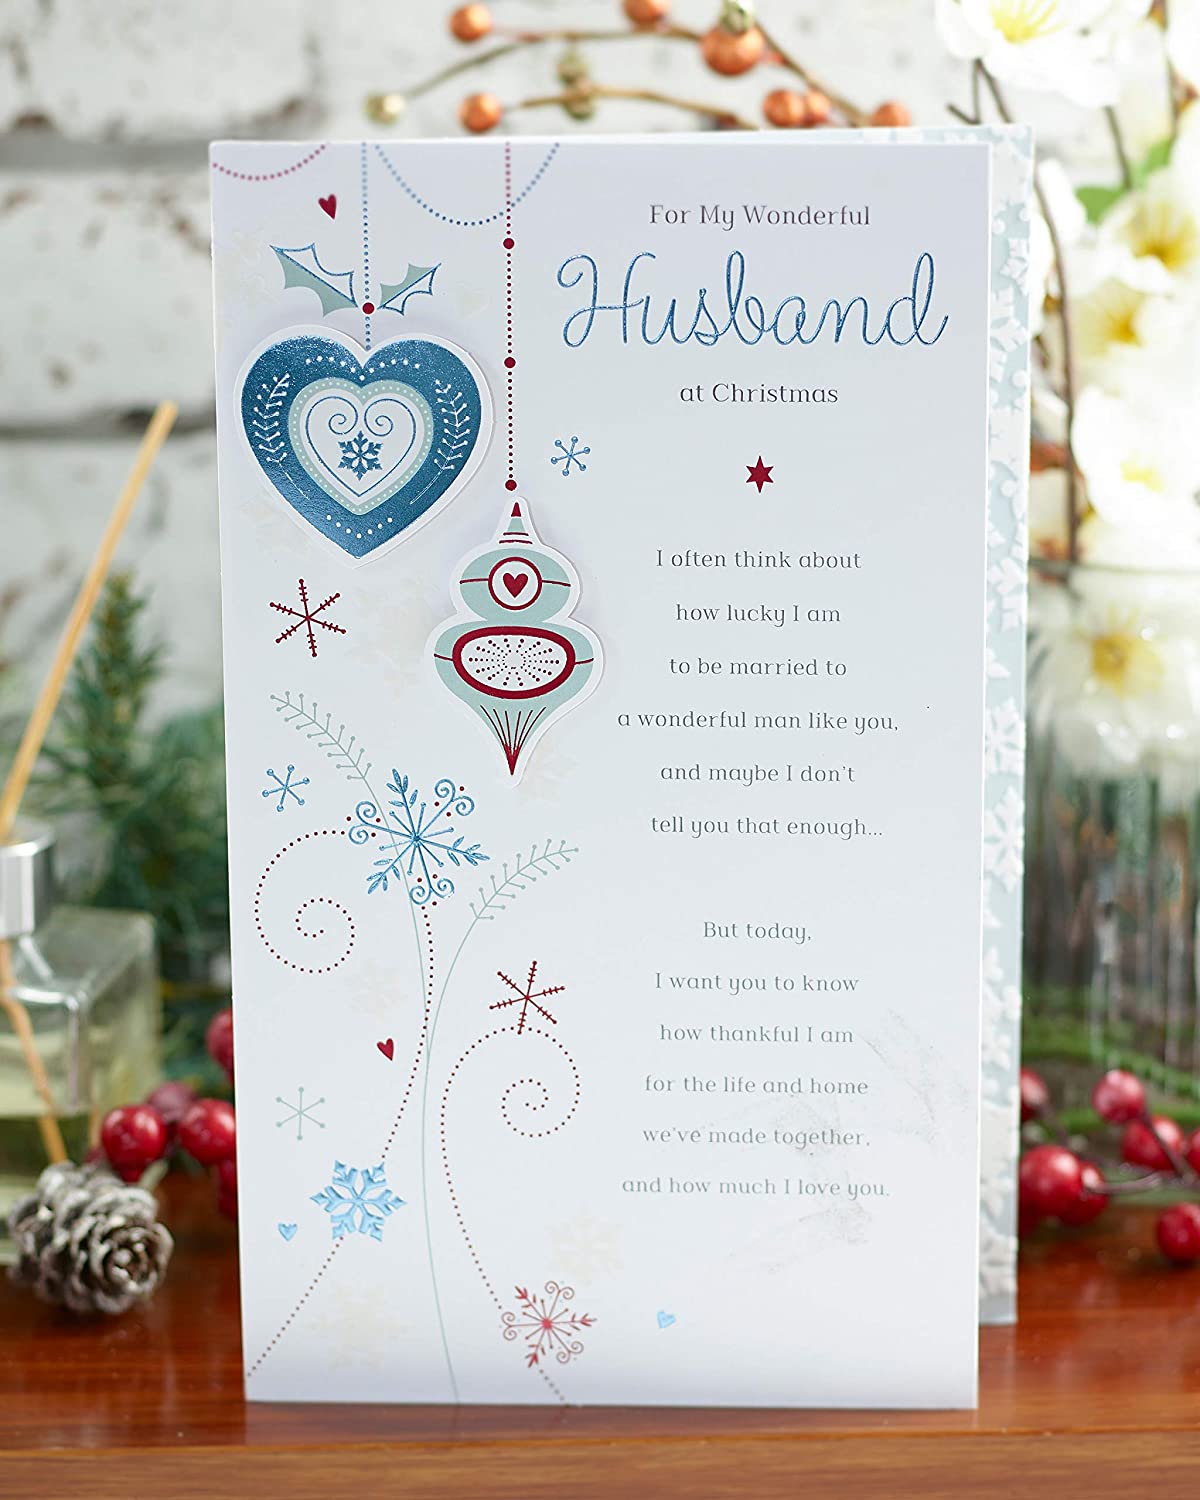 Husband Christmas Card Featuring Romantic Message 